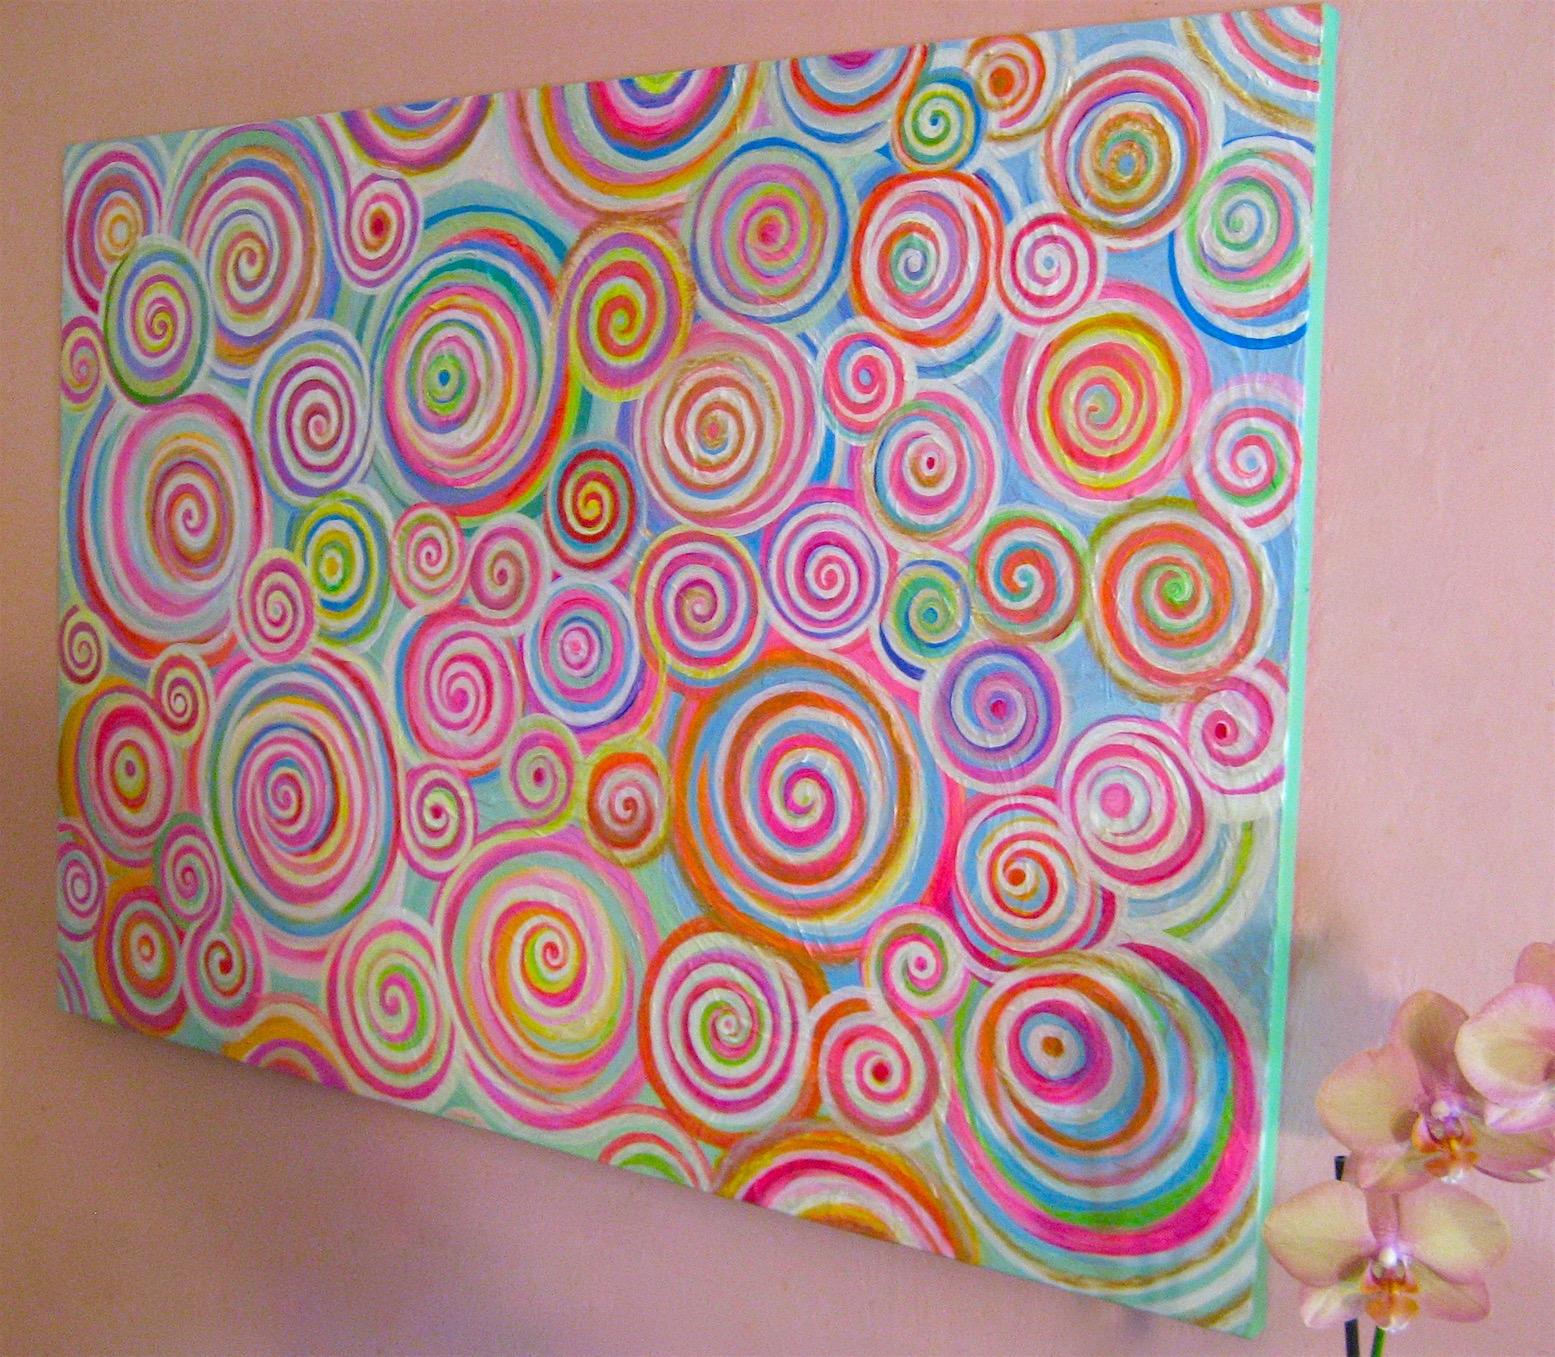 Curly - Painting by Natasha Tayles